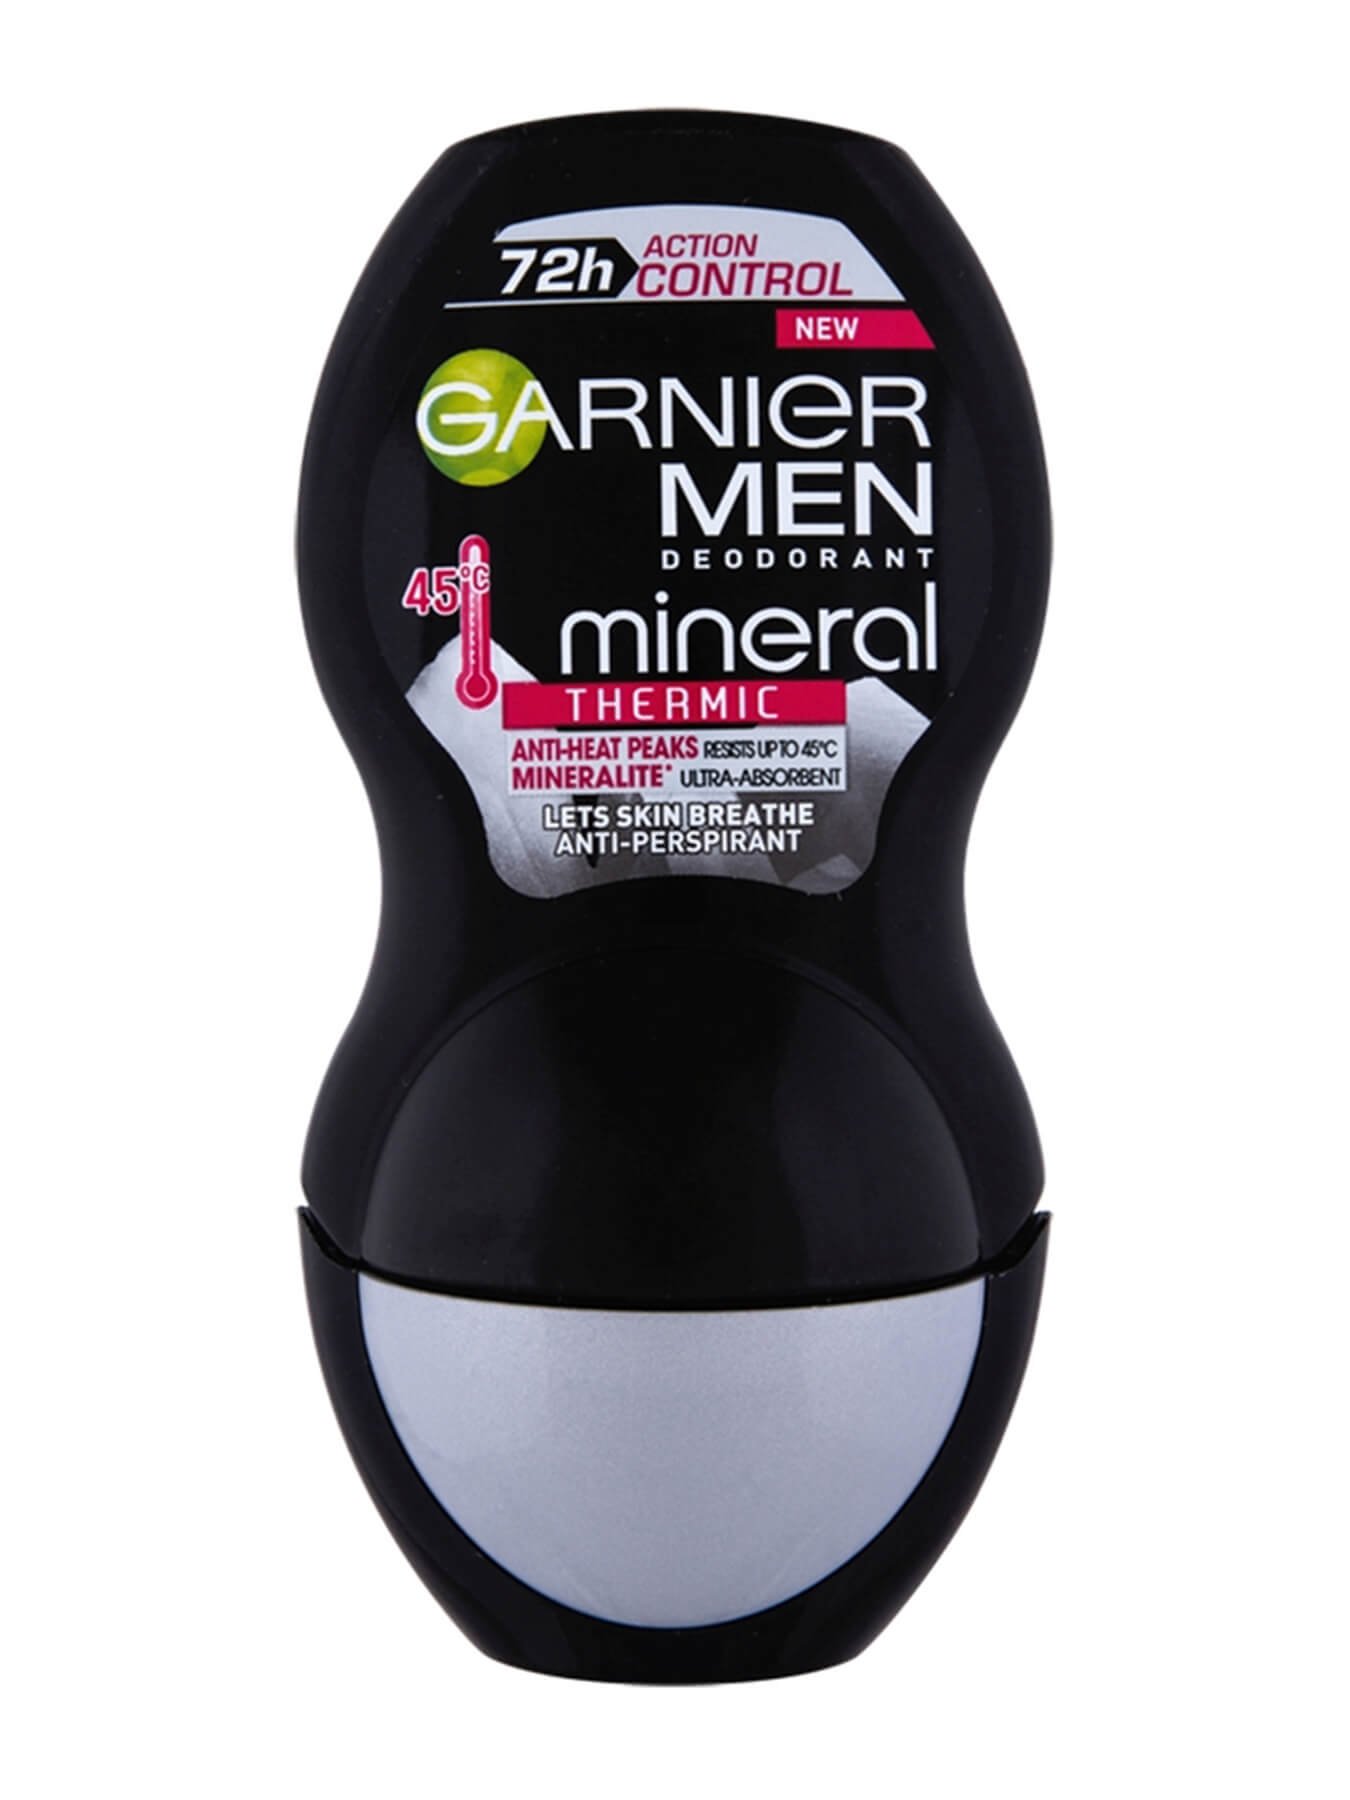 Garnier Mineral Deo Action Control Thermic men roll-on